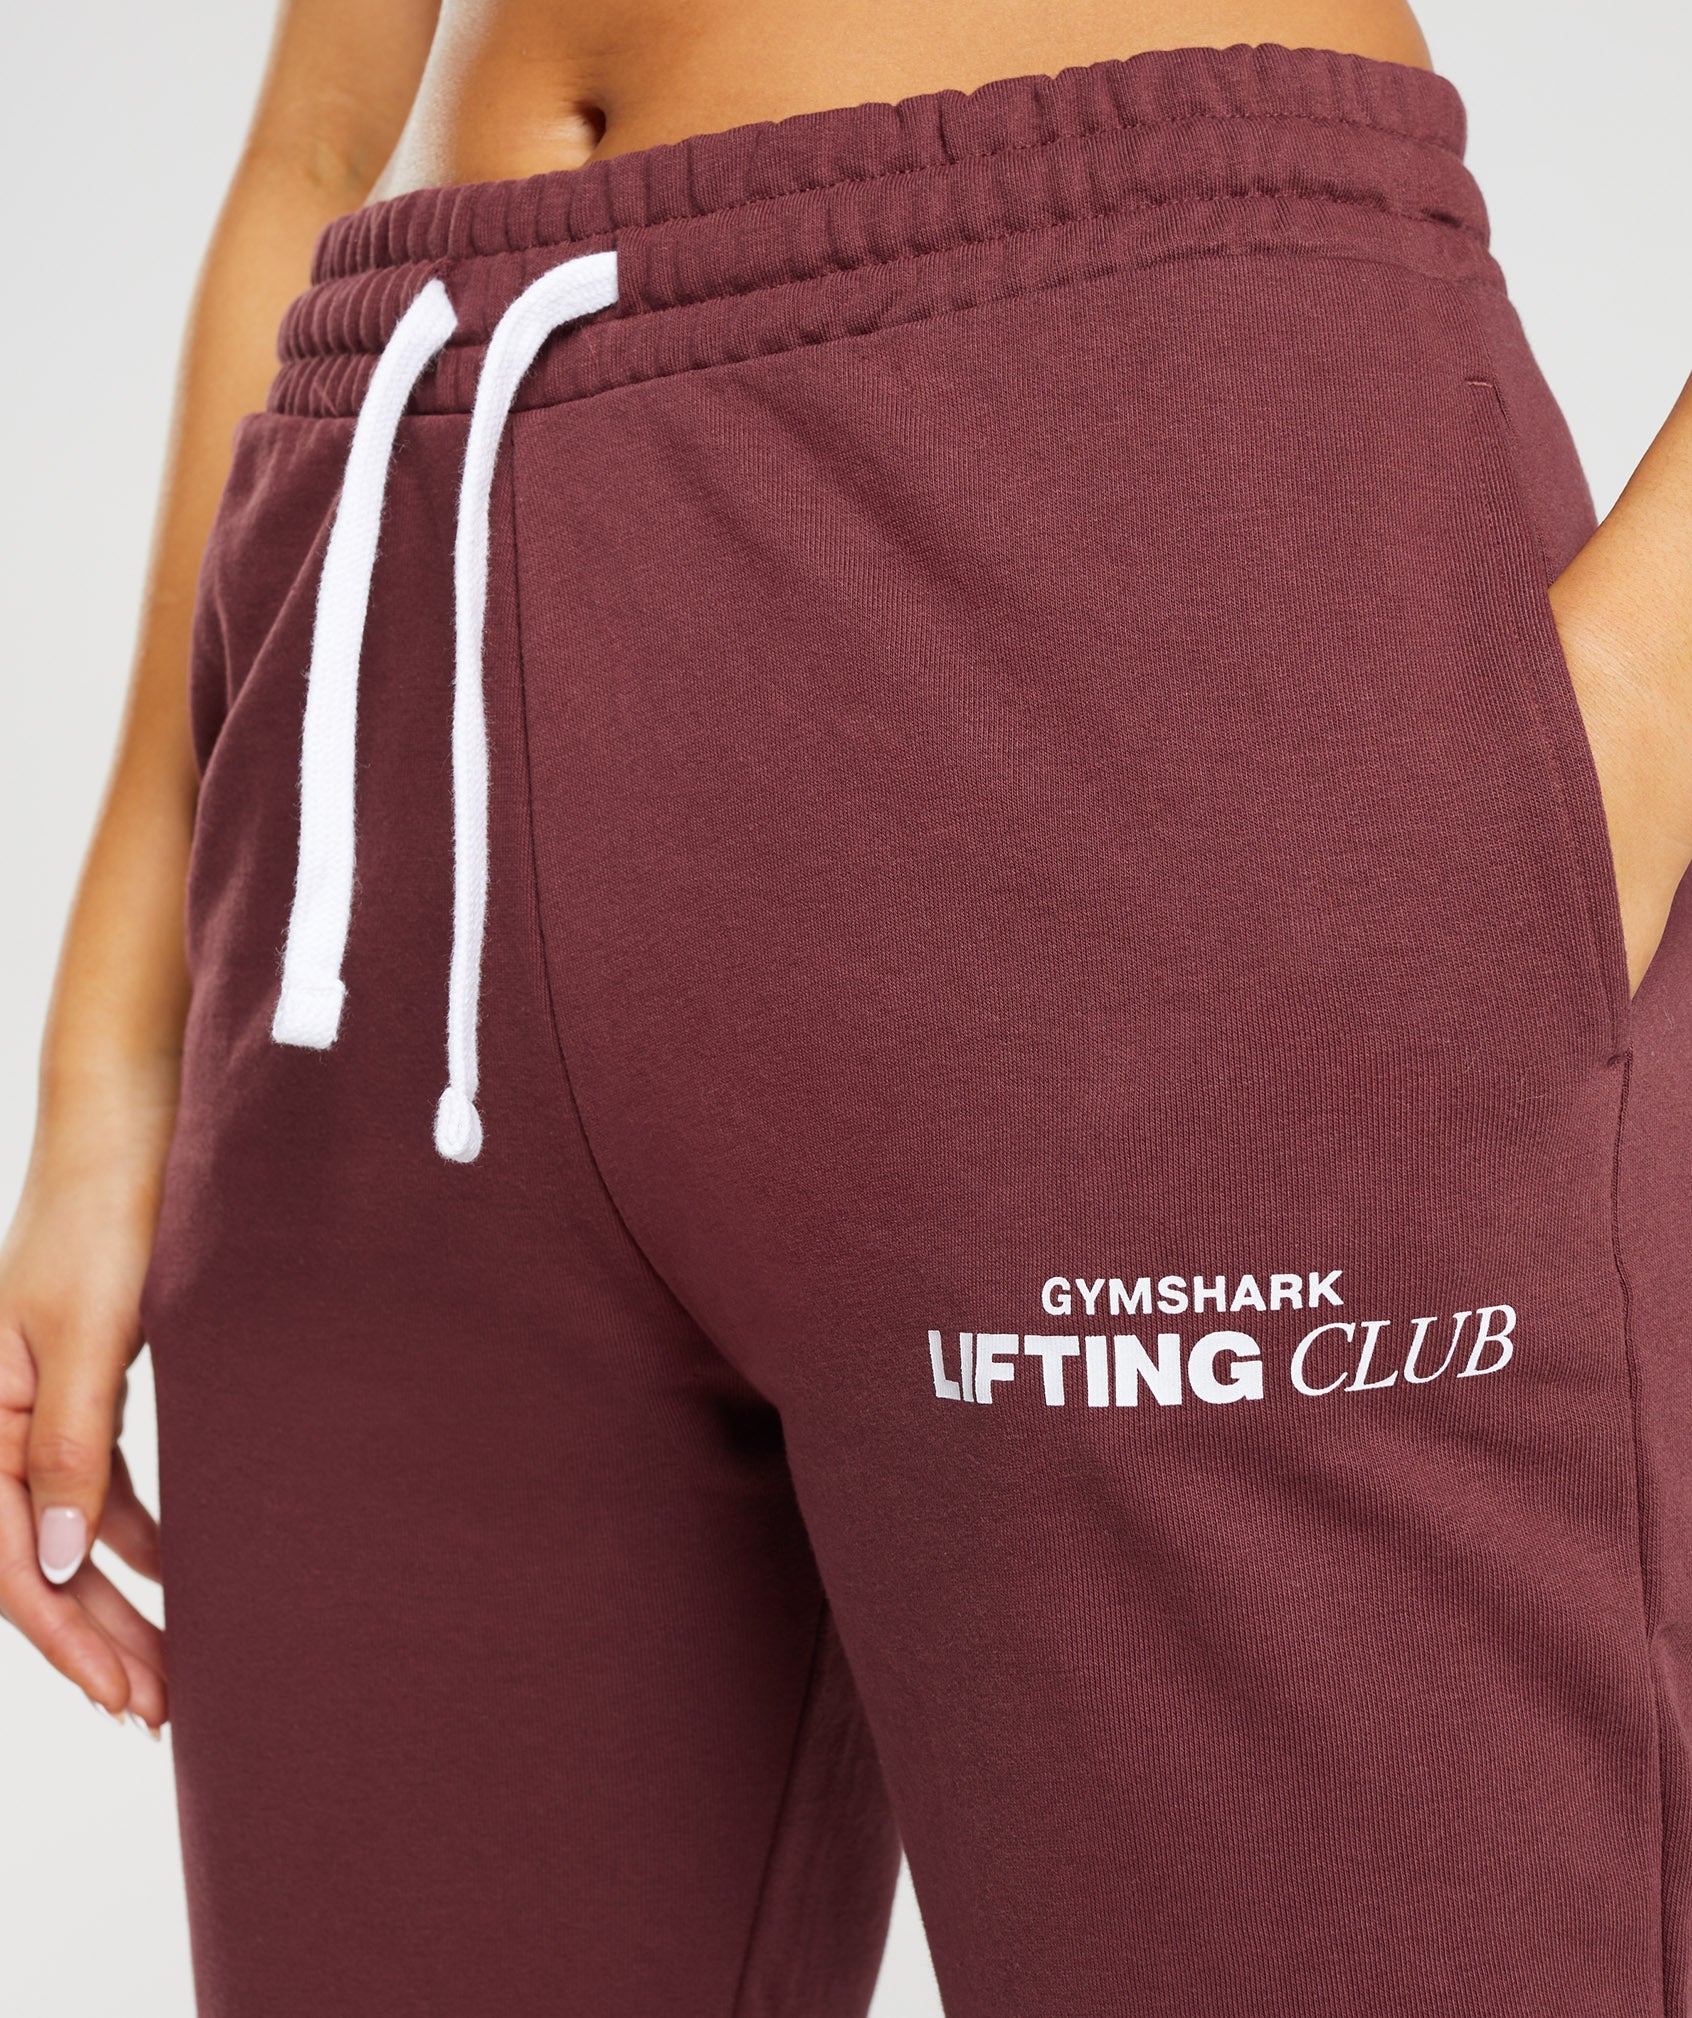 Social Club Joggers in Cherry Brown